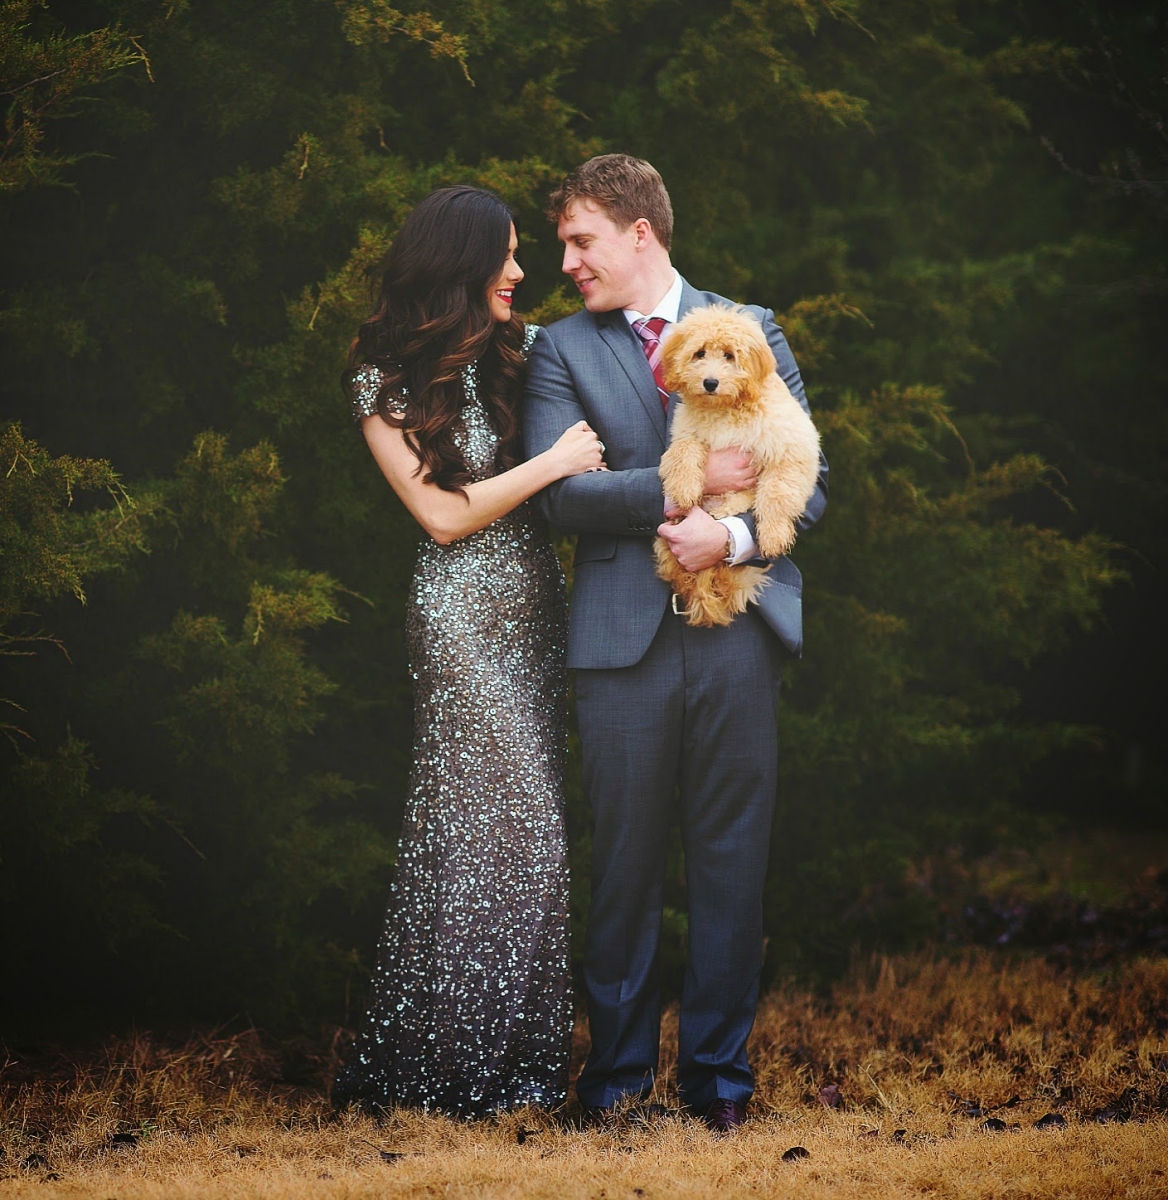 Sequin Leggings Outfit by popular US fashion blog, The Sweetest Thing: image of a woman wearing a silver sequin dress and standing next to her husband who is wearing a suit and holding their goldendoodle puppy. 